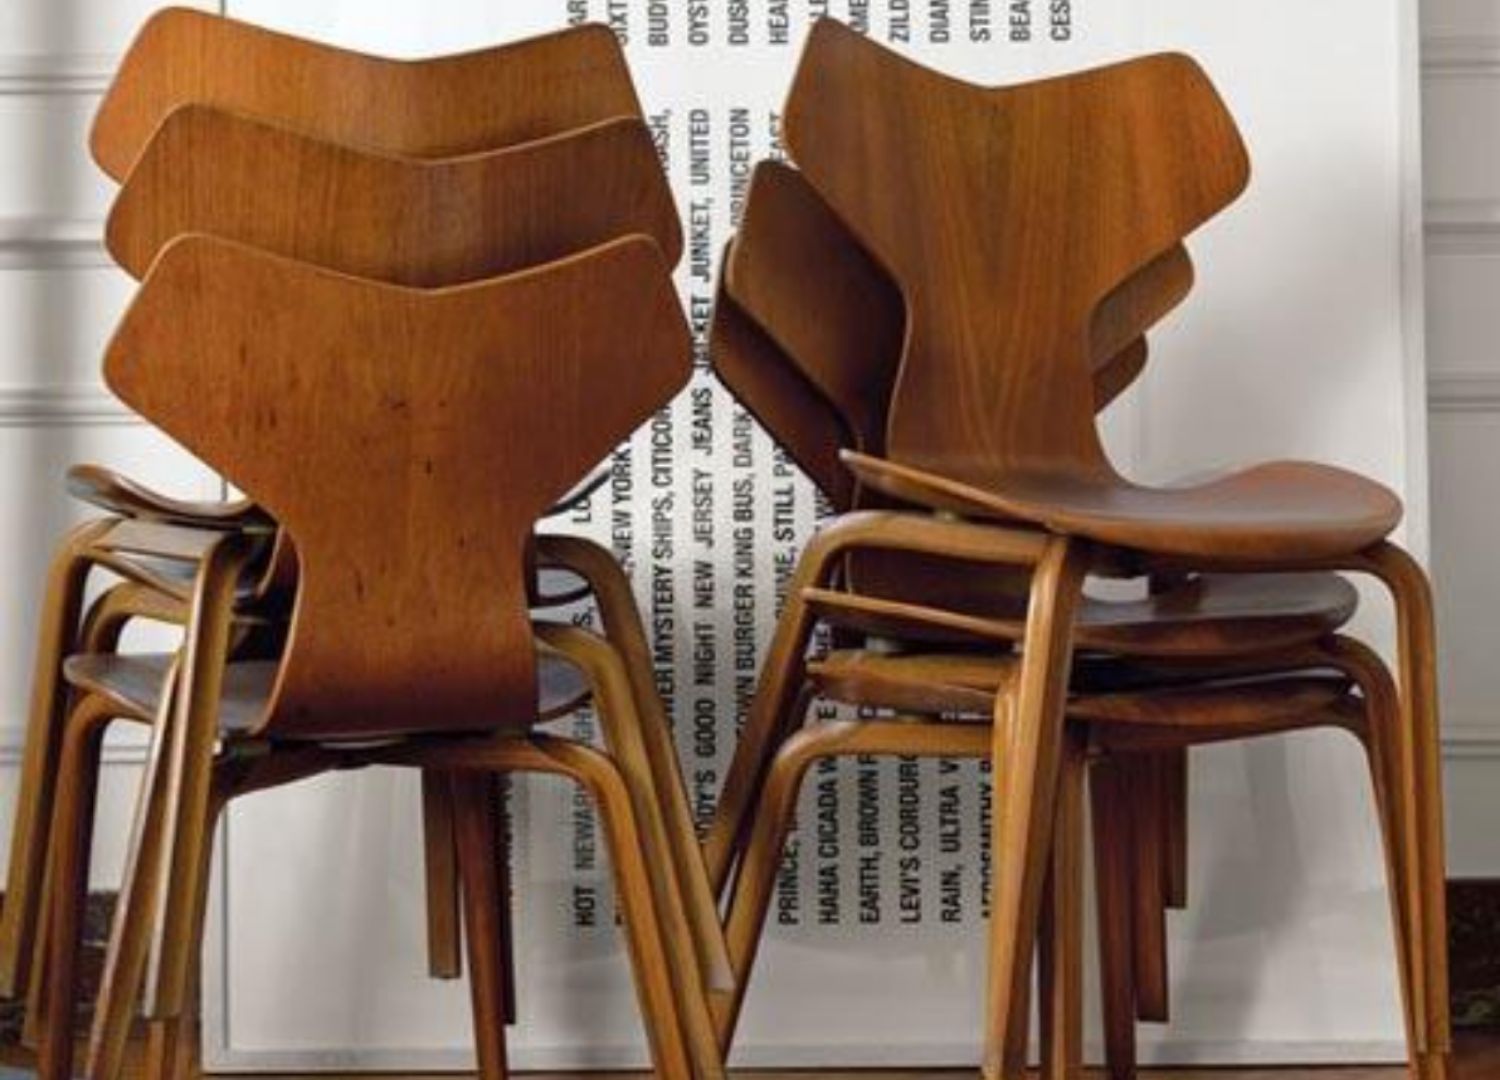 The Grand Prix chair _10 most recognized Arne Jacobsen designs